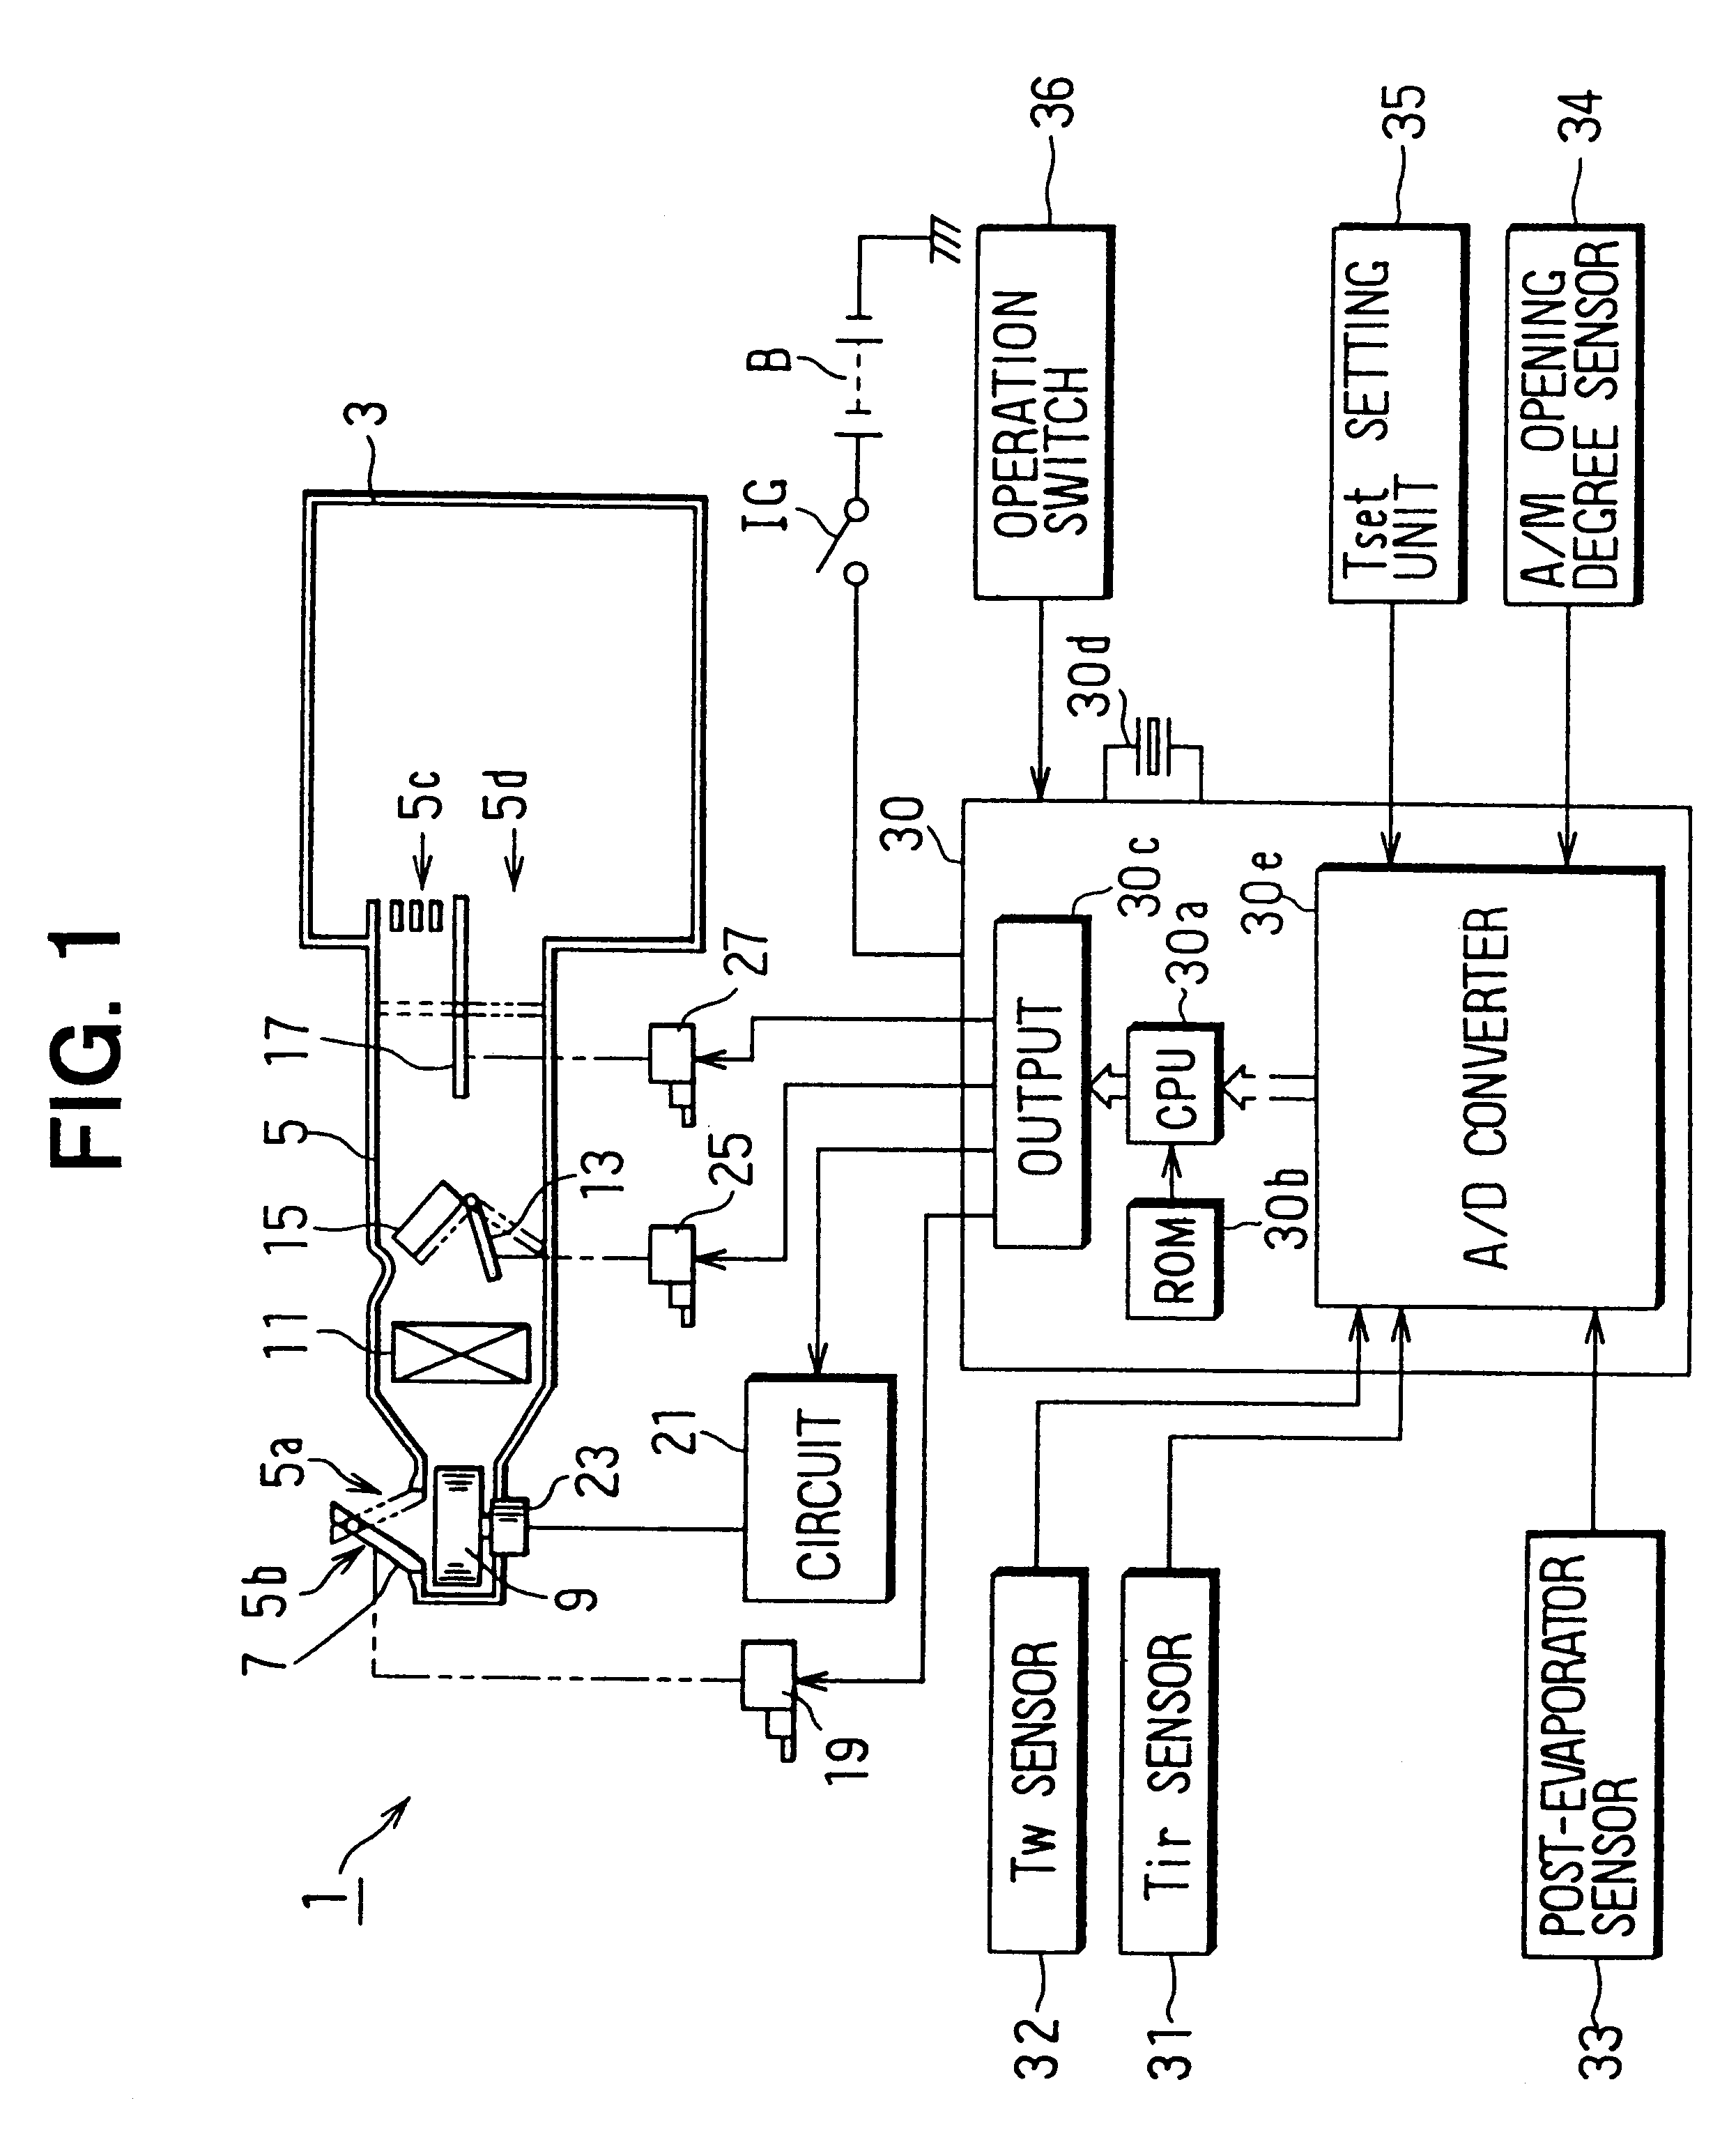 Vehicle air conditioner with non-contact temperature sensor